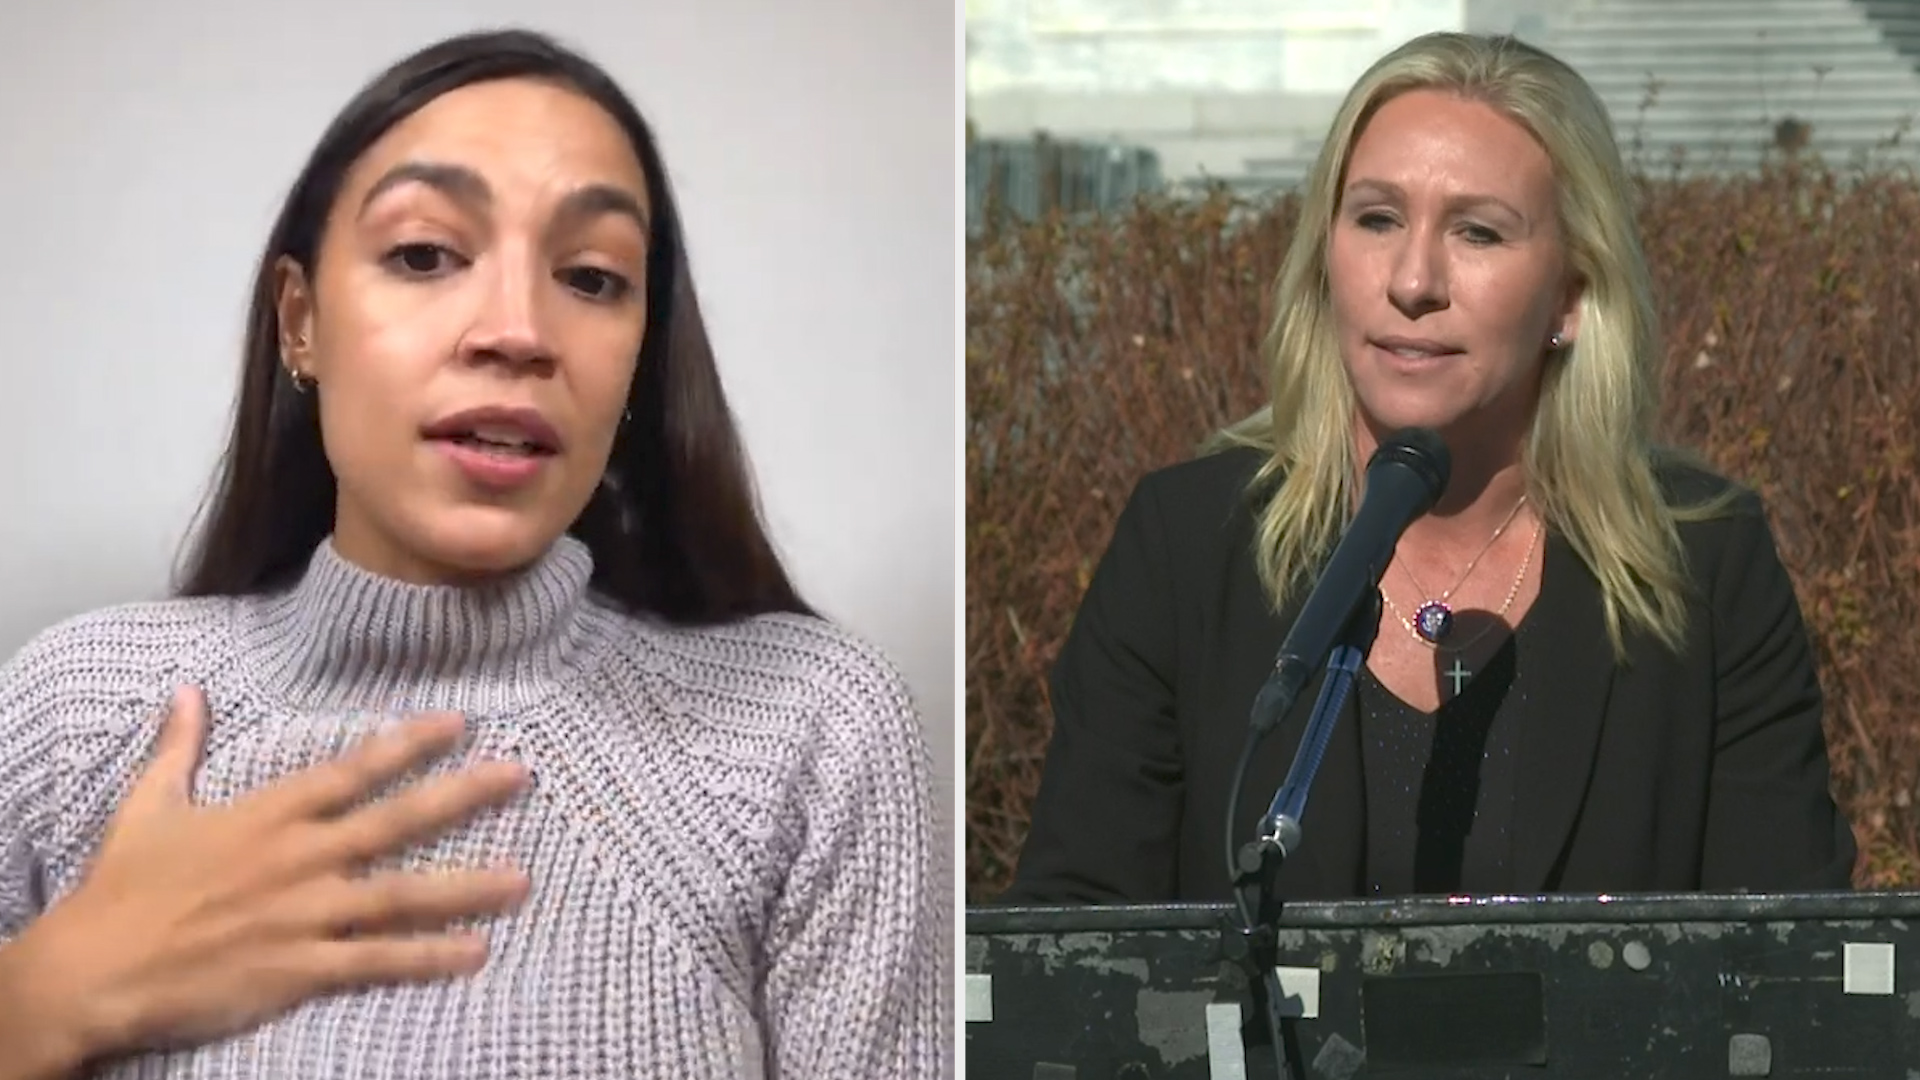 AOC Says It Might Be Time To 'Rein In' Media After DC Riots - And